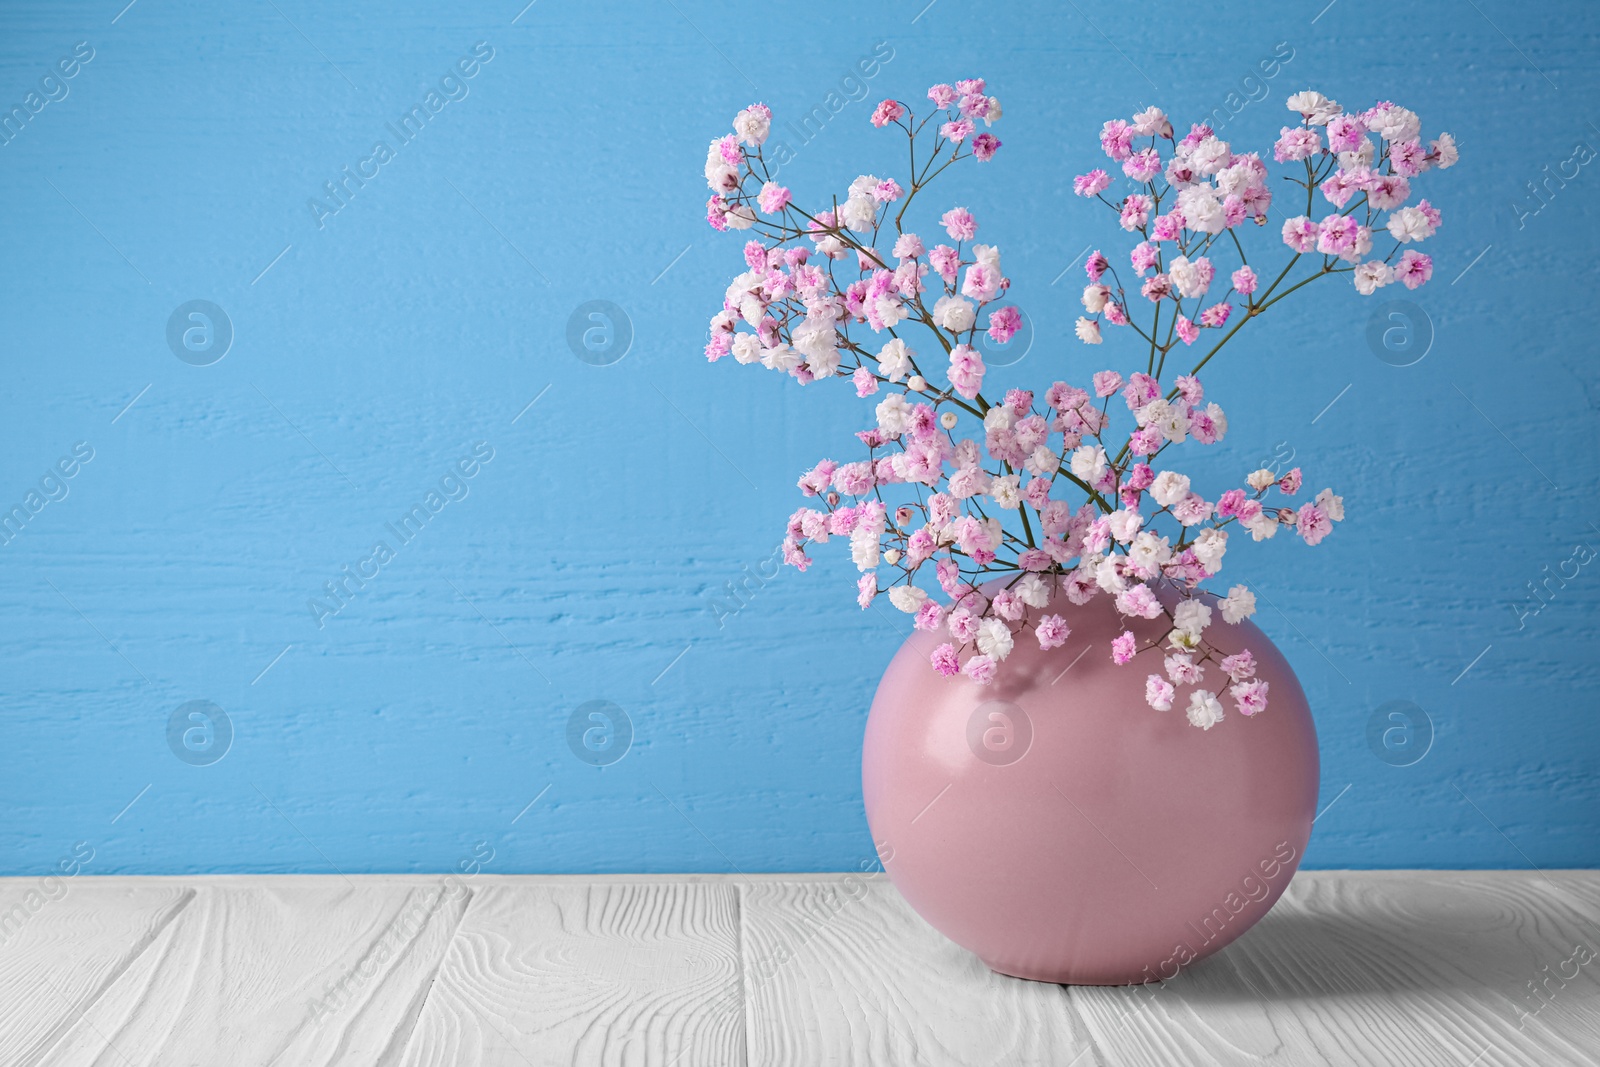 Photo of Beautiful dyed gypsophila flowers in pink vase on white wooden table against light blue background. Space for text